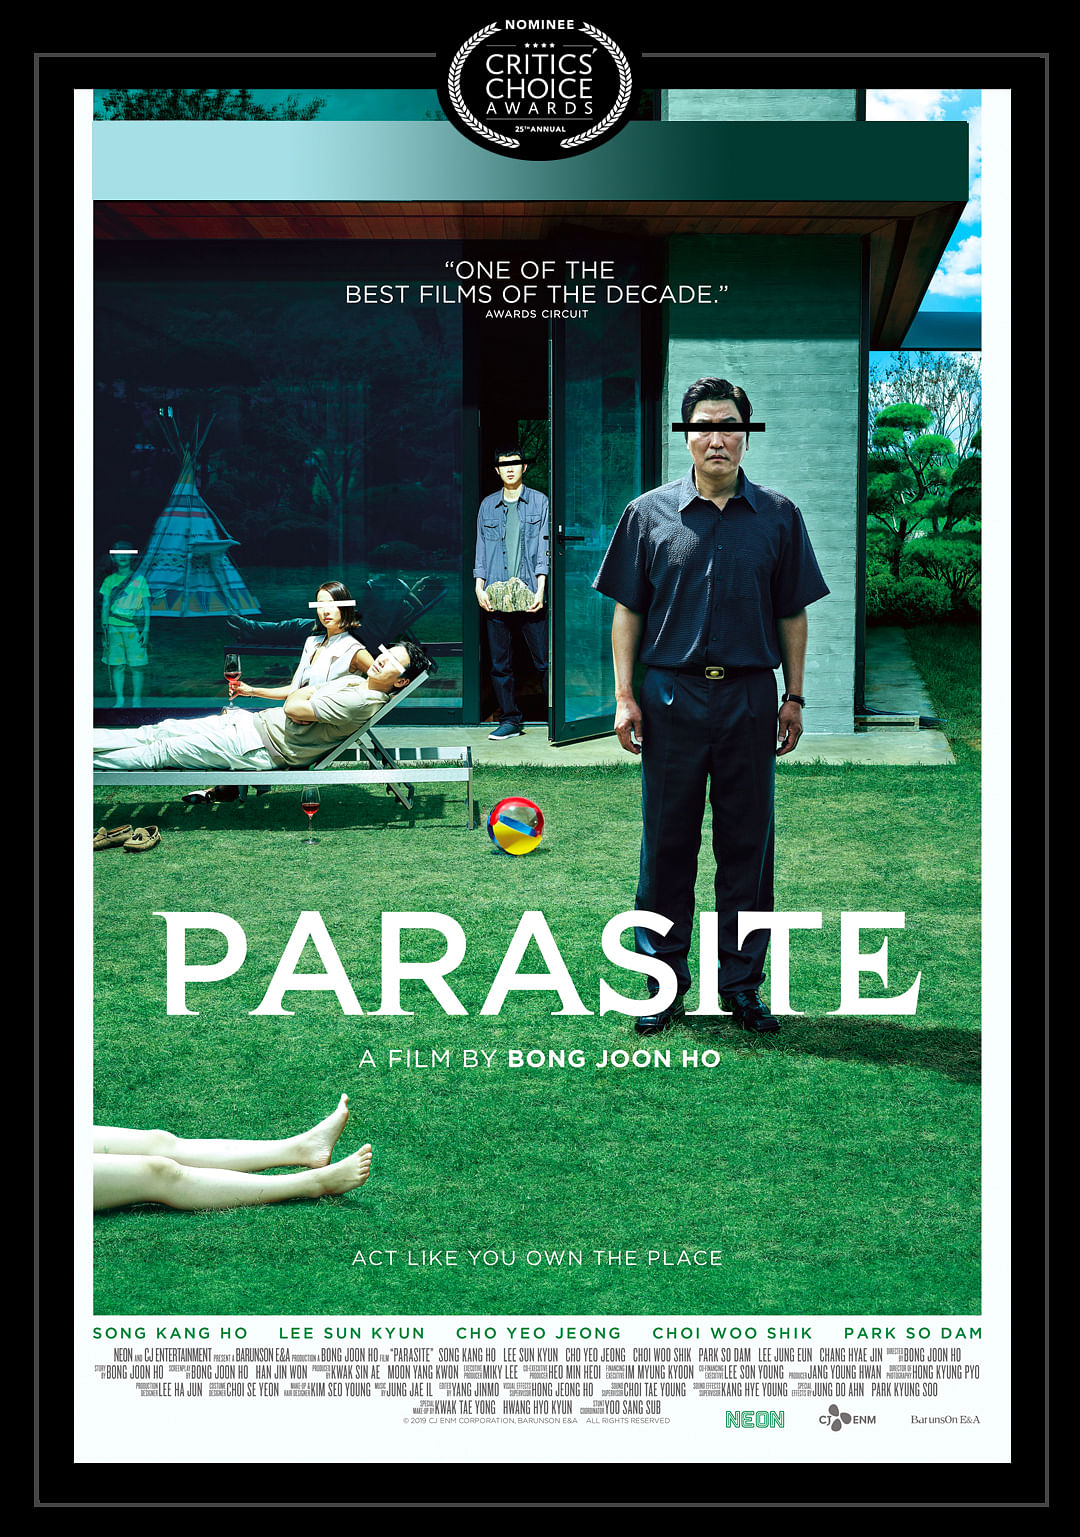 "Parasite" has been on a winning streak ahead of the Oscars, collecting trophies at the Critics Choice Awards and Golden Globes. (Twitter Image/@ParasiteMovie)